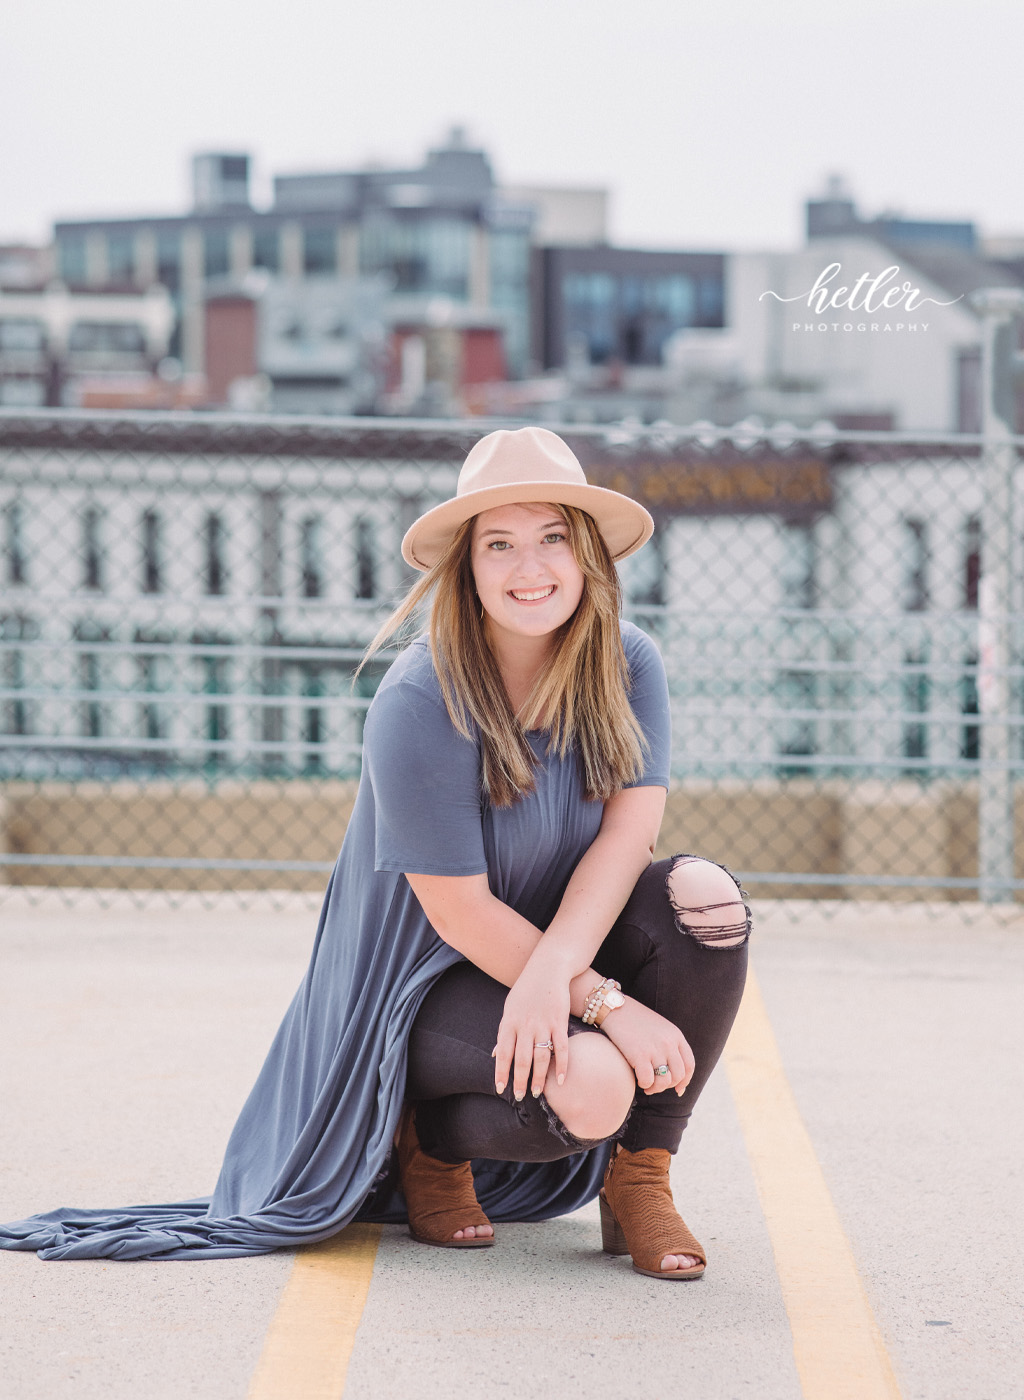 downtown Grand Rapids senior photos with a high school senior girl in a felt hat, ripped black jeans and trendy outfit